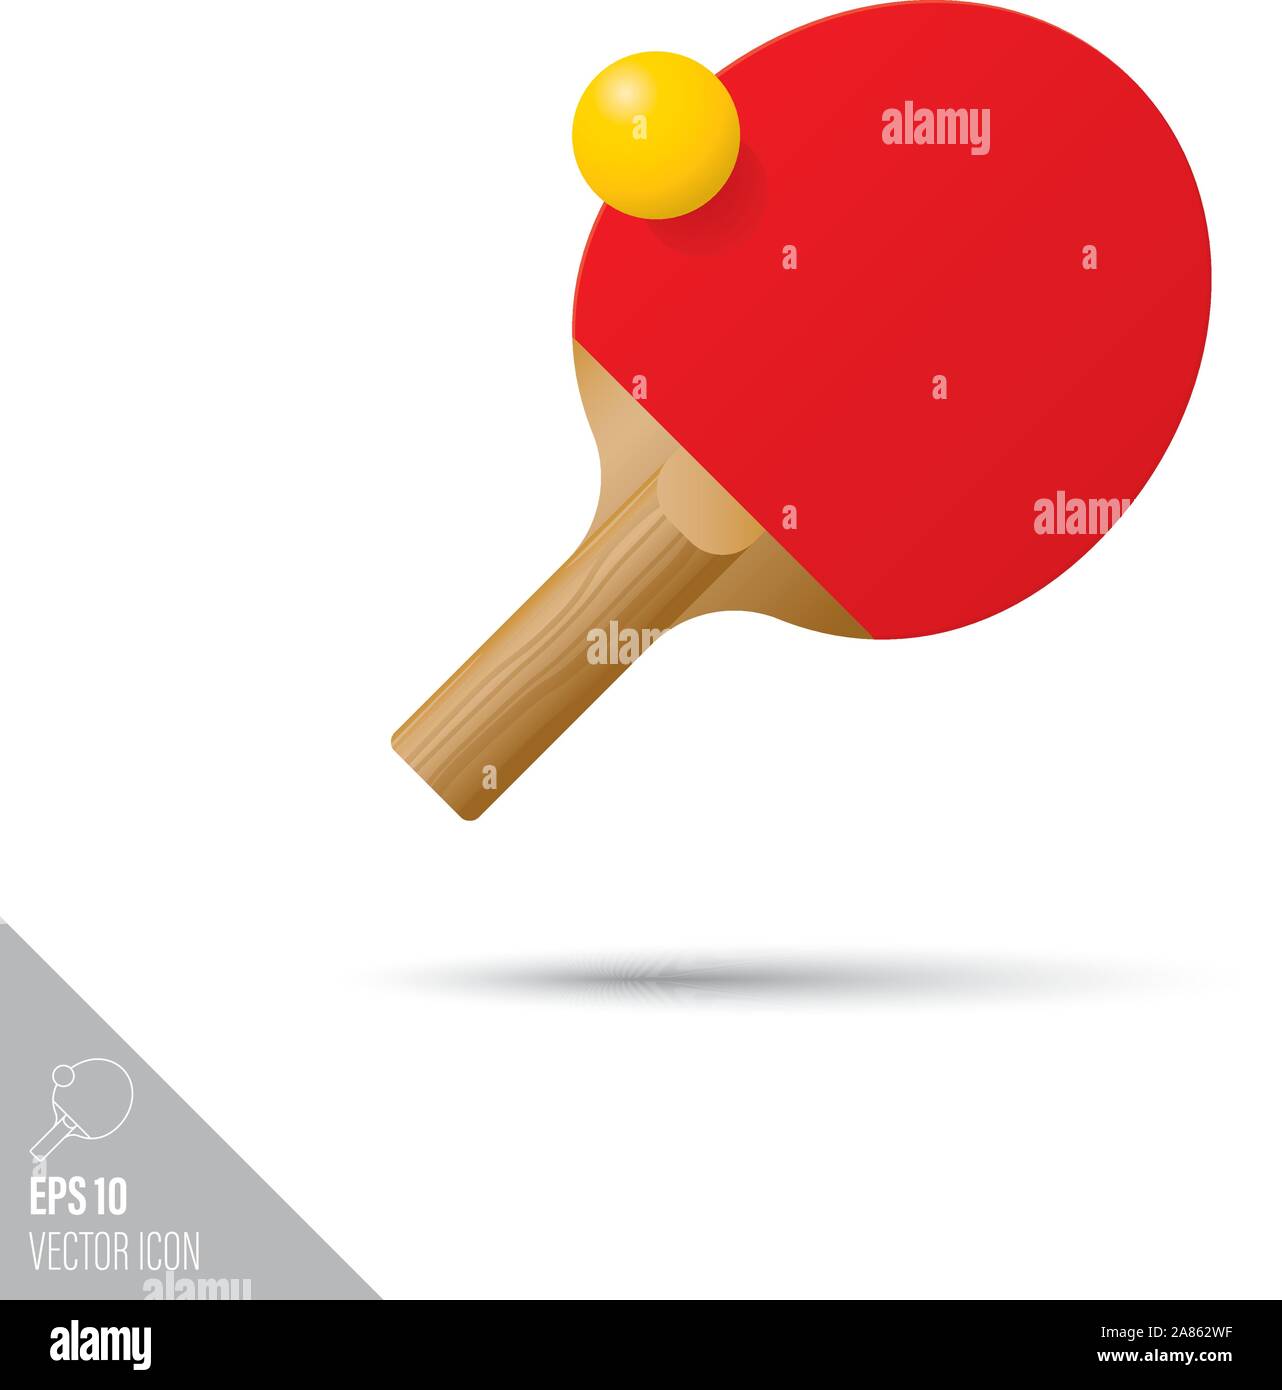 Smooth style table tennis paddle and ball icon. Sports equipment vector illustration. Stock Vector